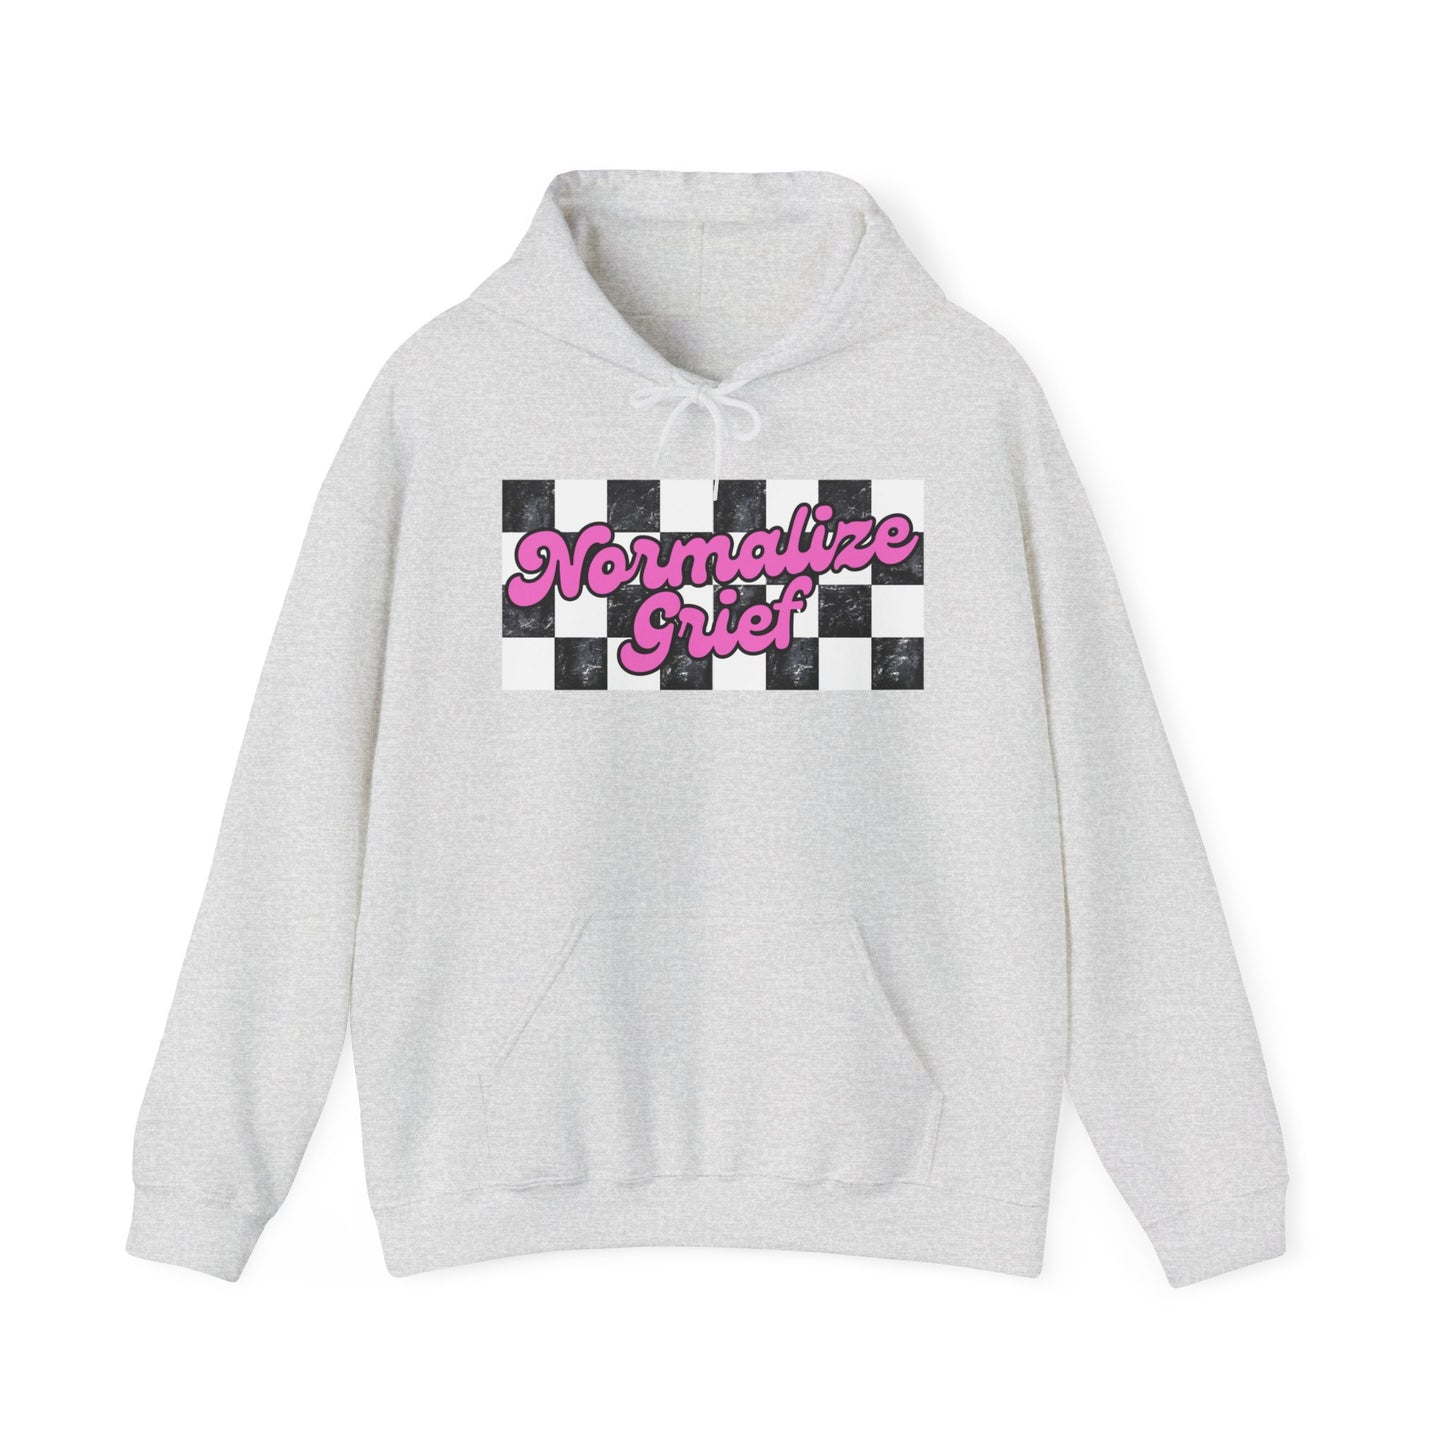 Normalize Grief | Hoodie